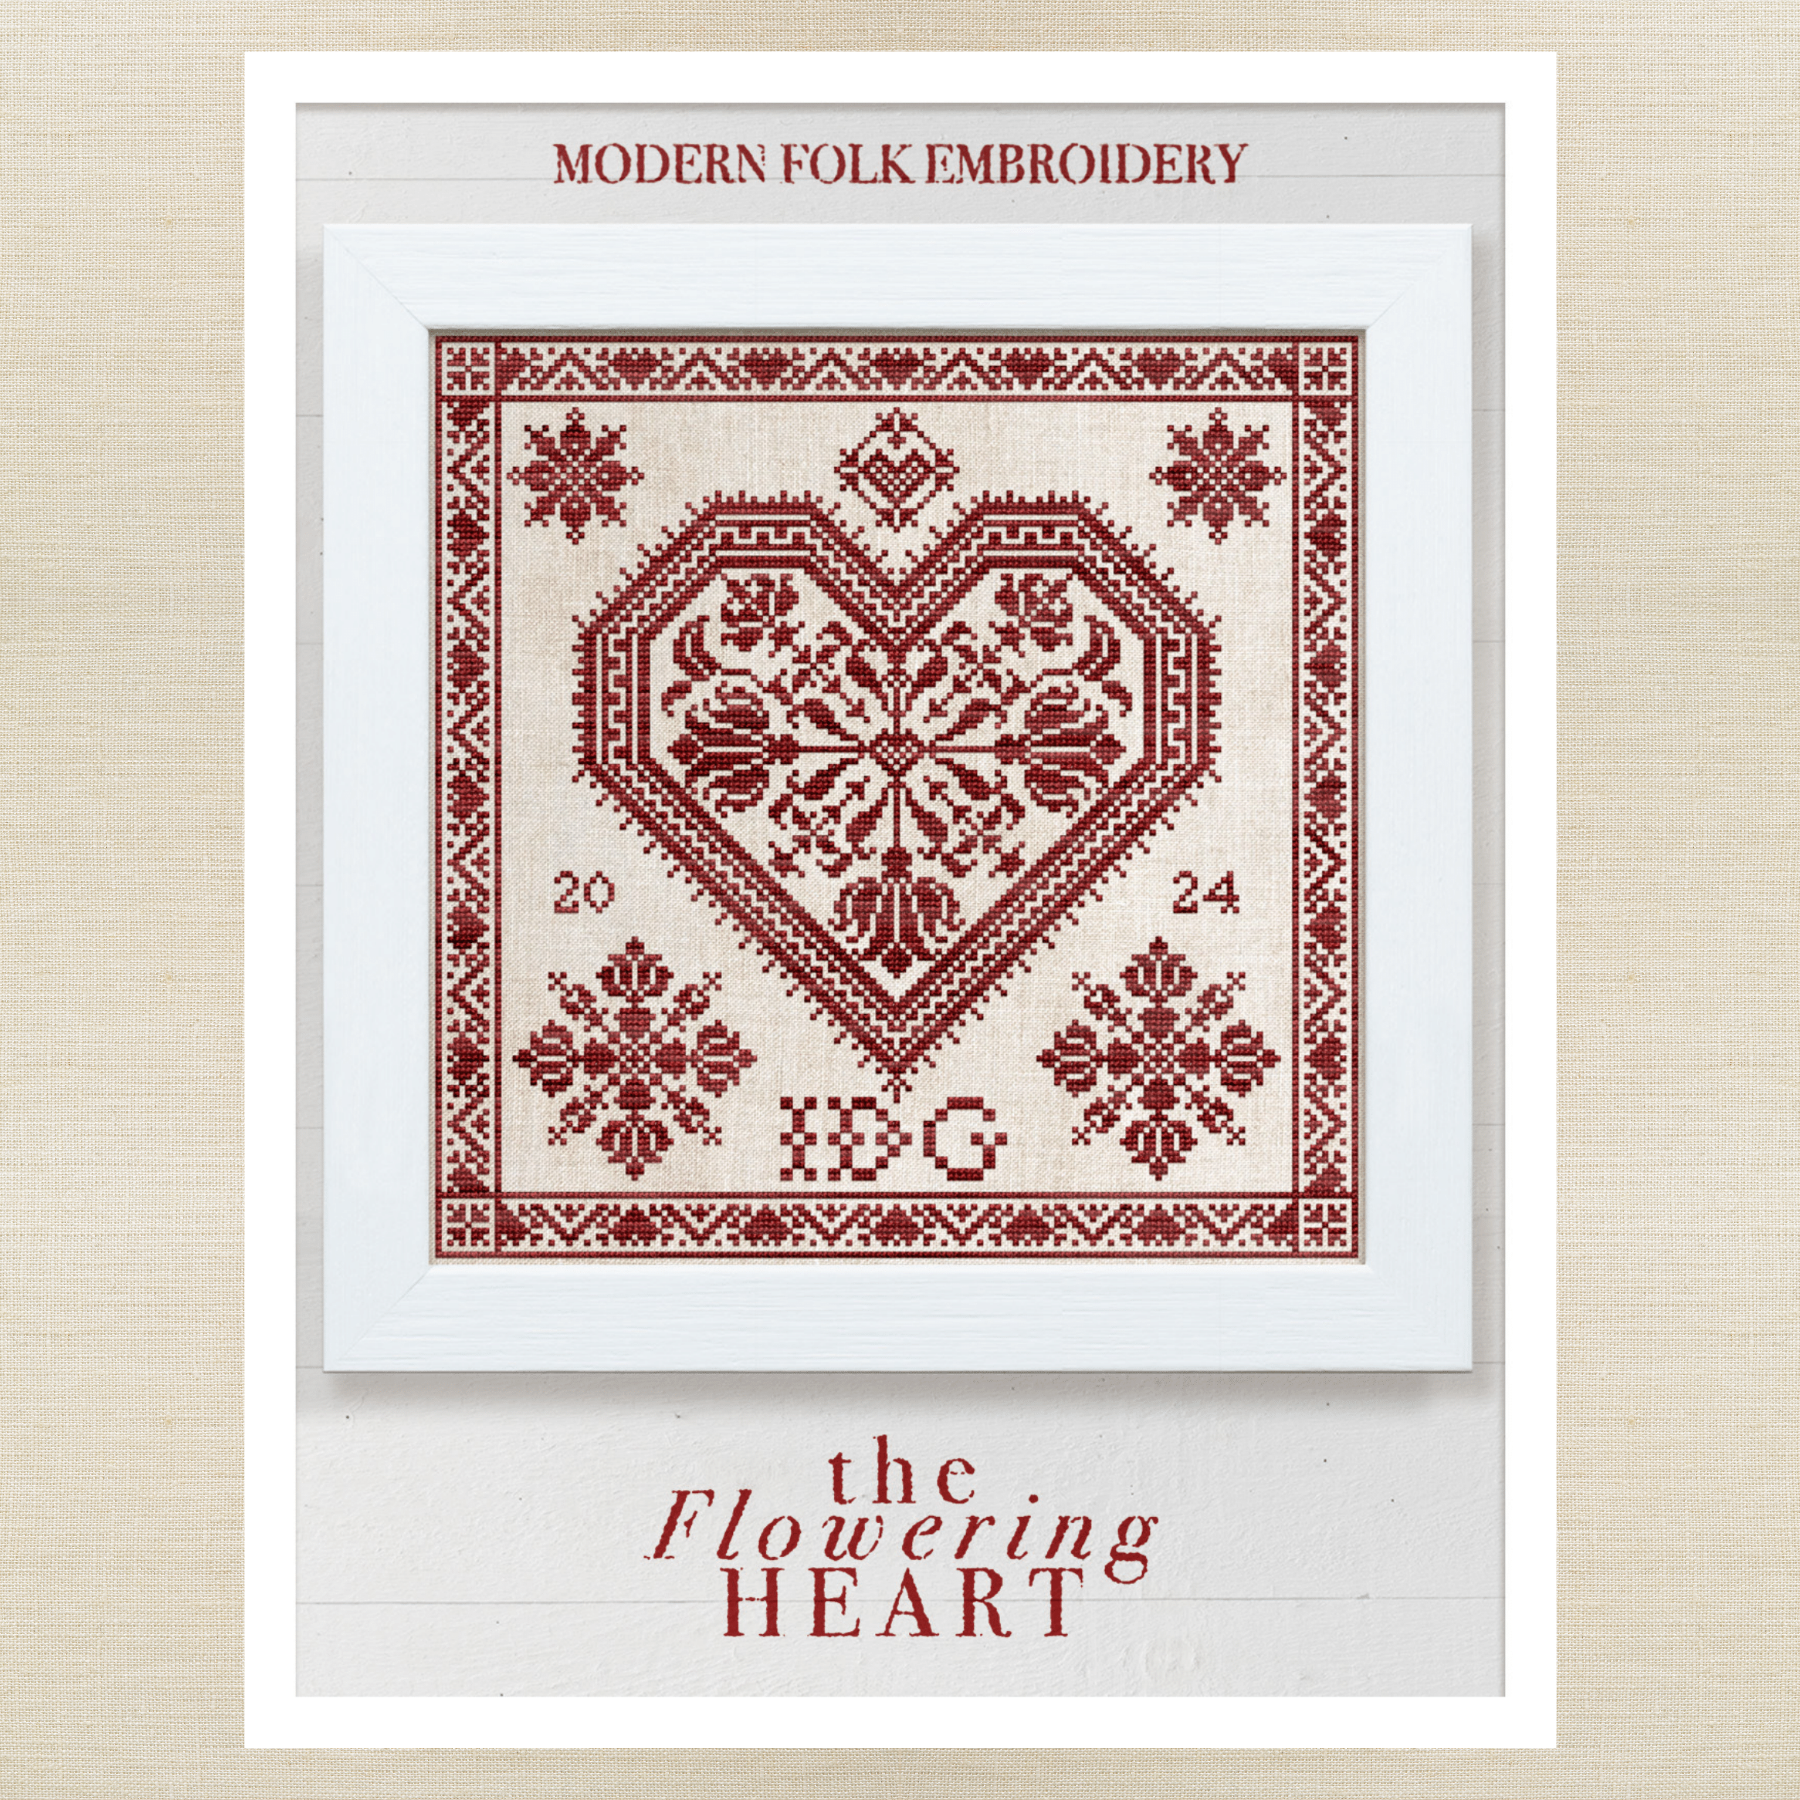 Buy Modern Folk Embroidery Book Online at Low Prices in India